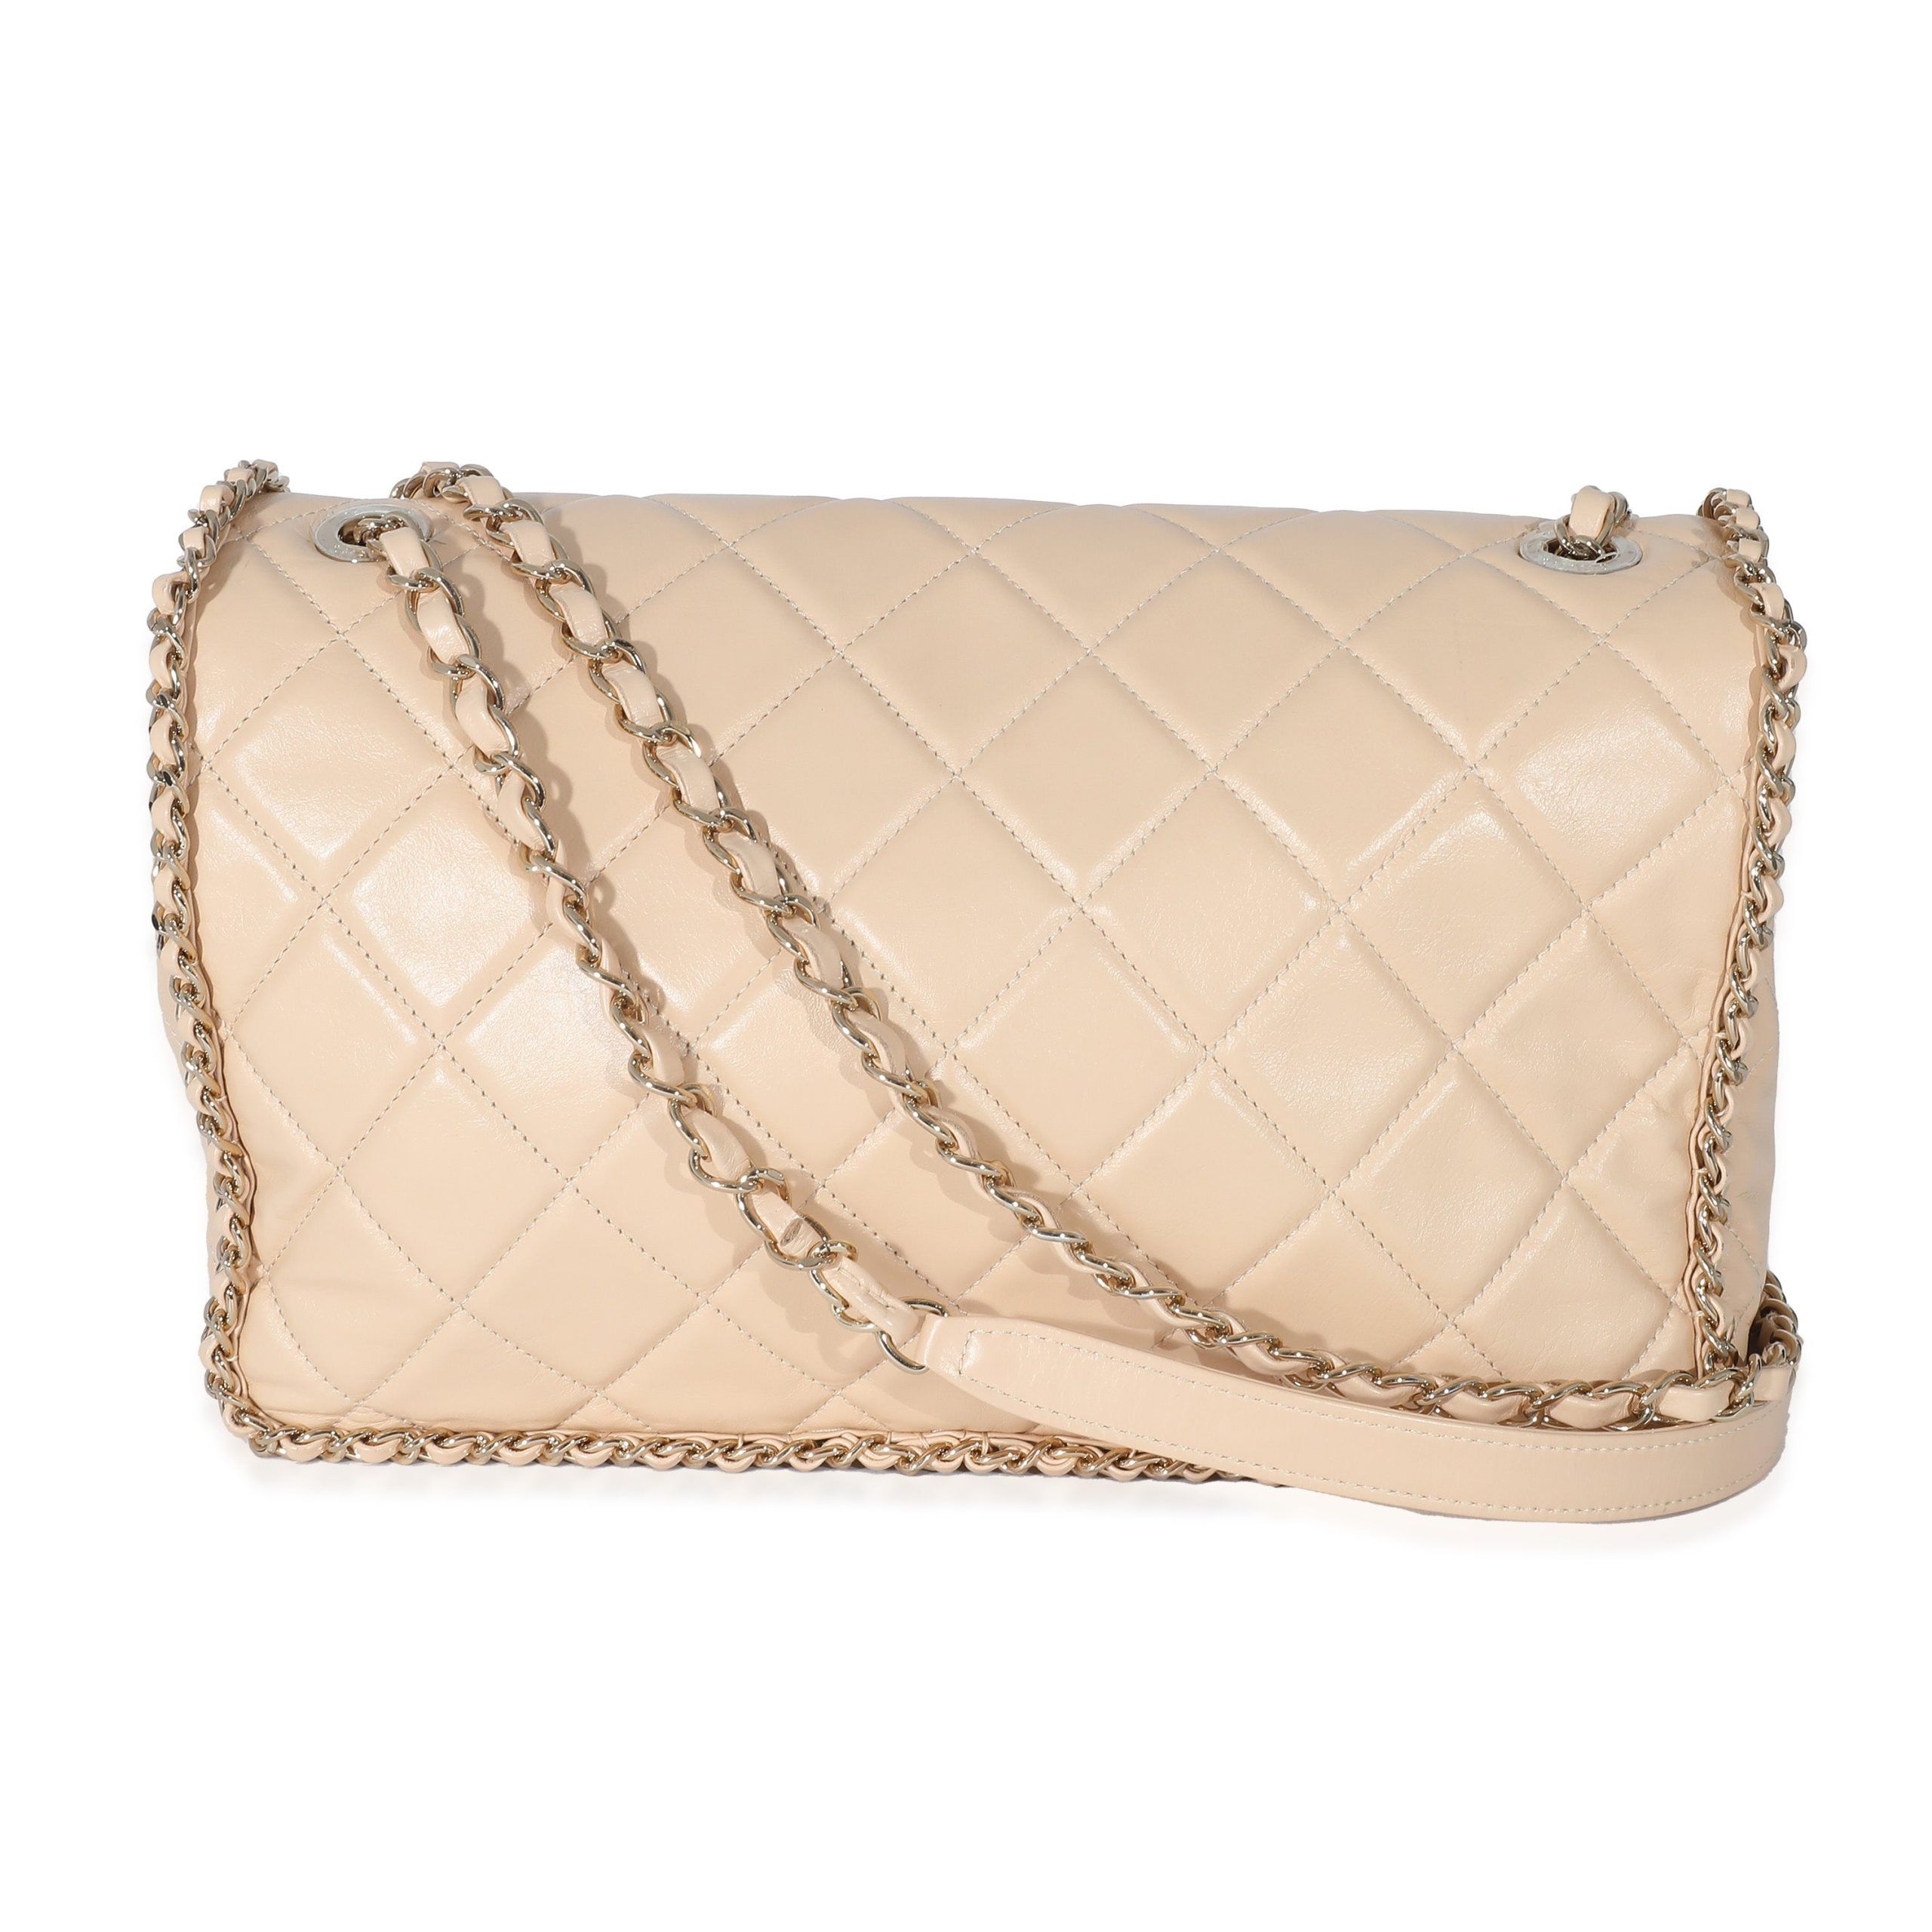 Chanel Chanel Beige Crumpled Calfskin Medium Chain All Over Flap Bag Size ONE SIZE - 4 Thumbnail